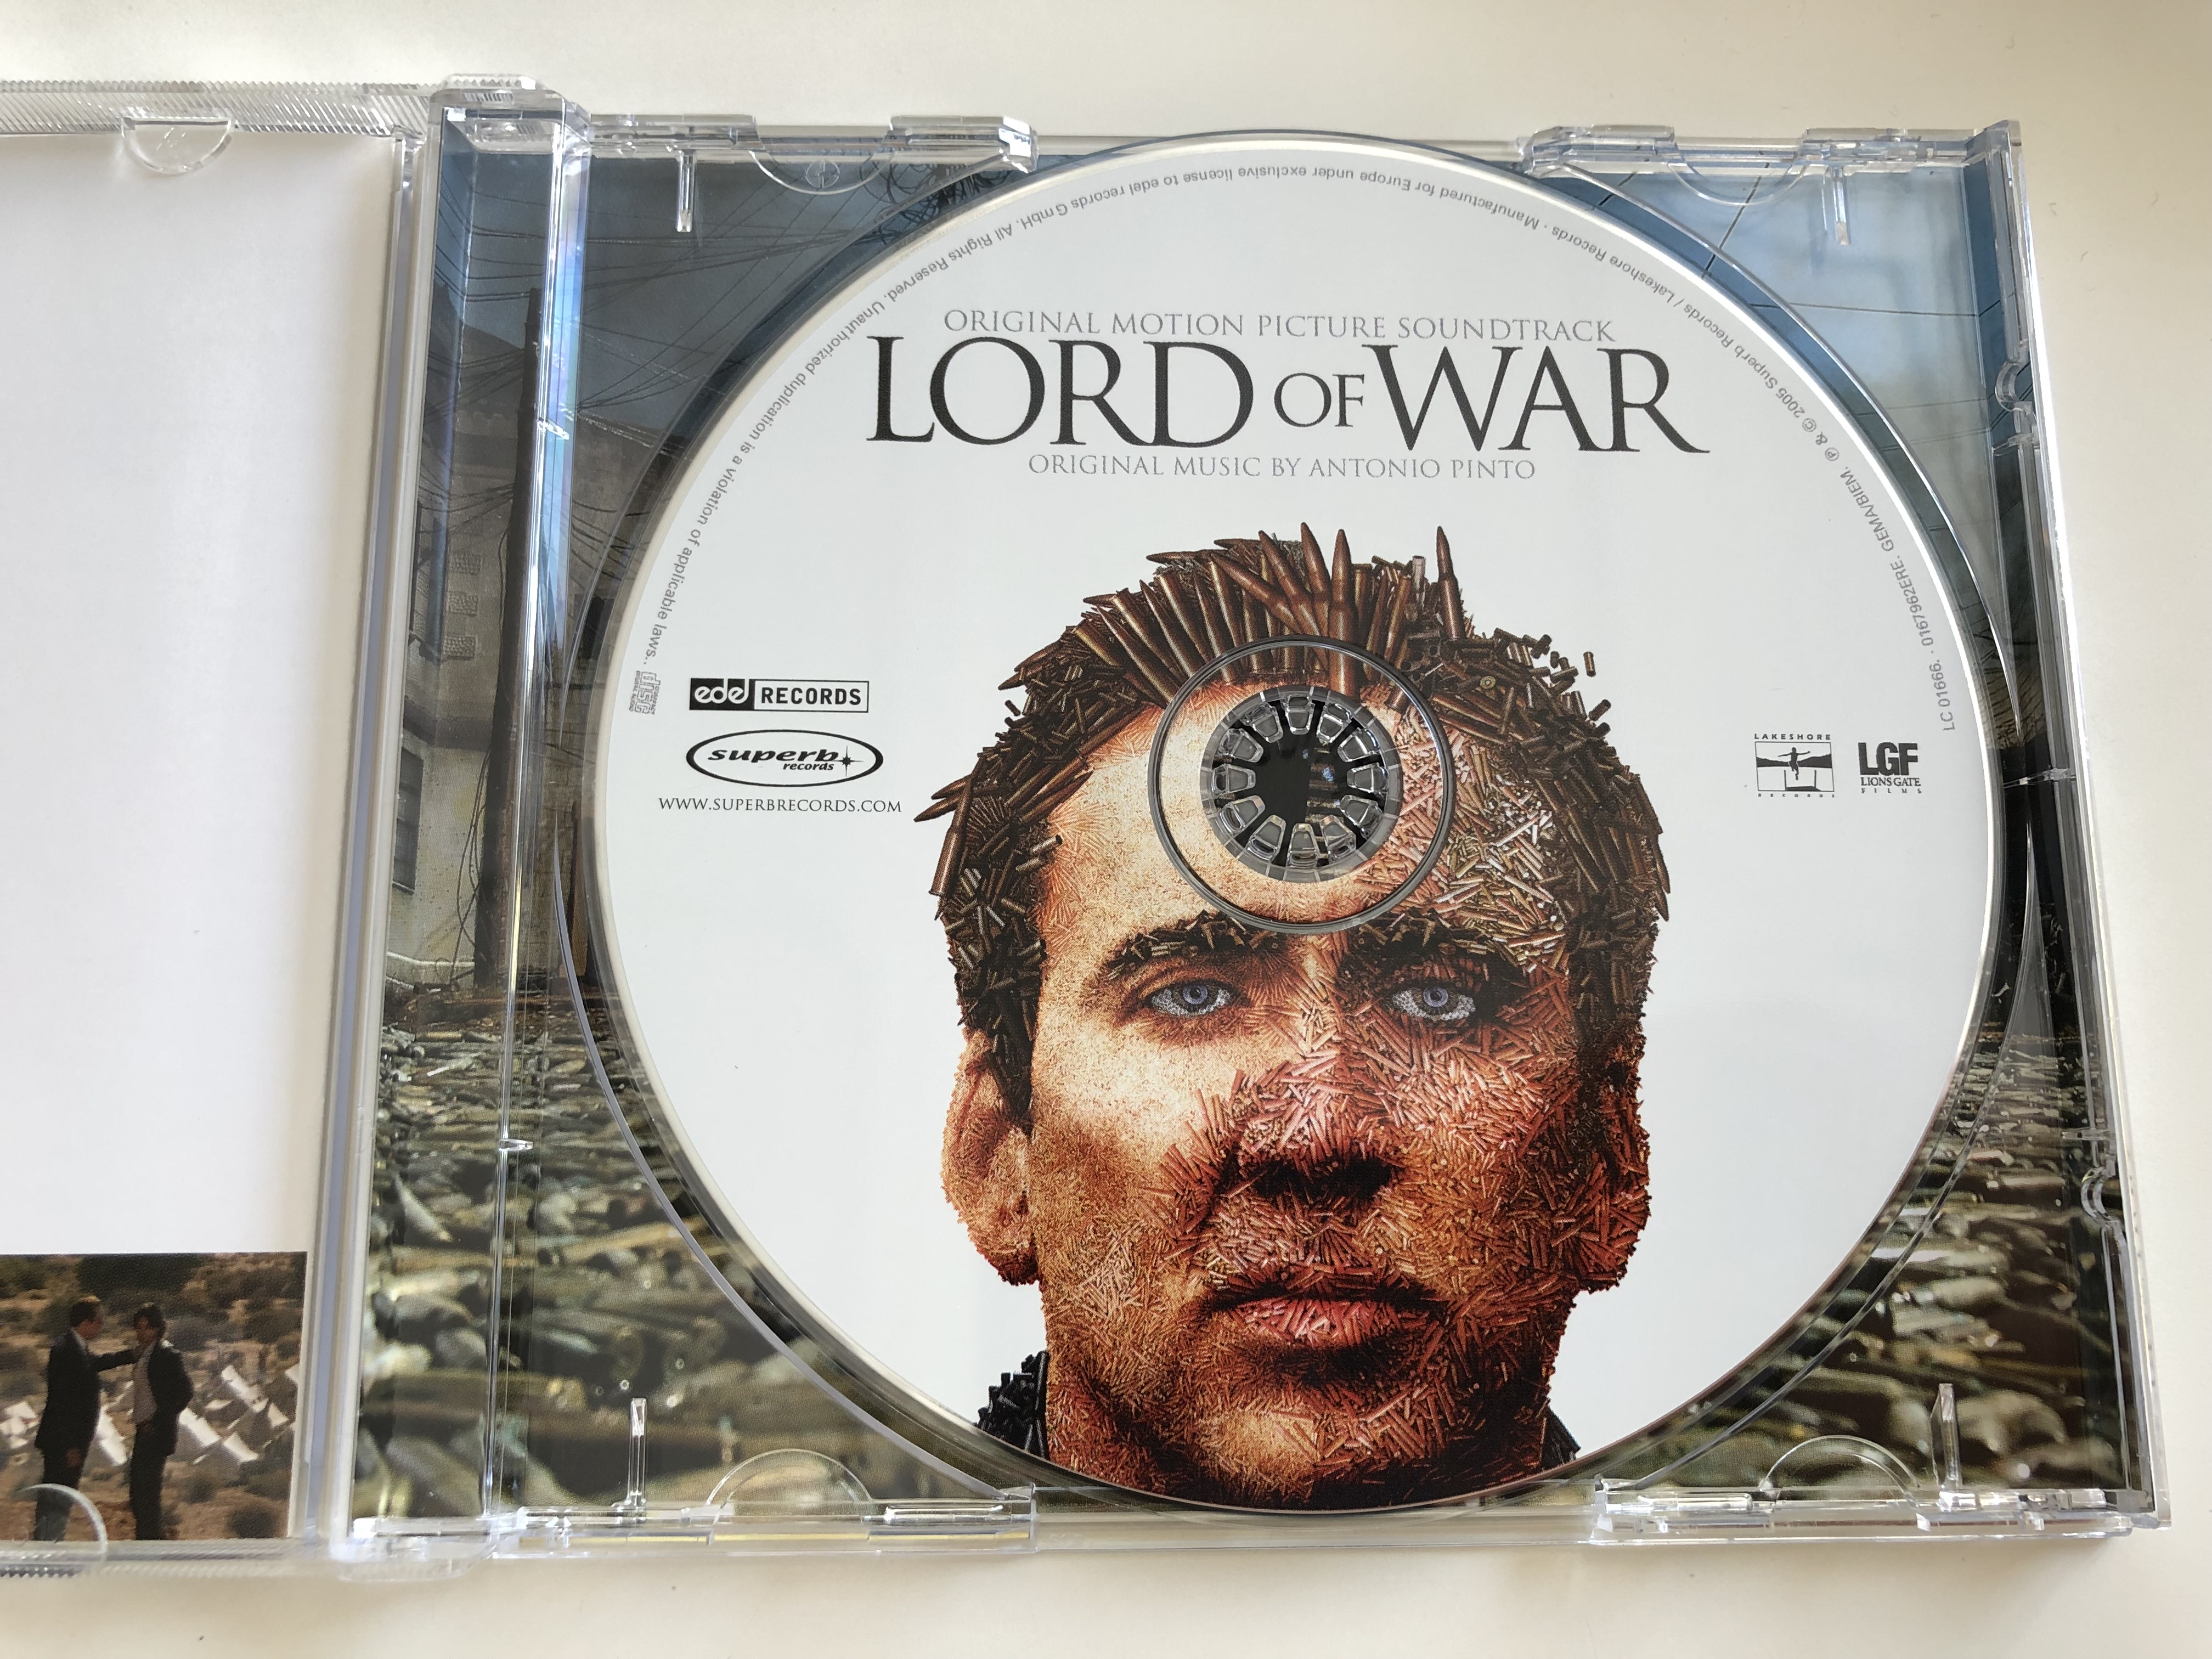 lord-of-war-original-motion-picture-soundtrack-original-music-by-antonio-pinto-audio-cd-2005-0167962ere-4-.jpg